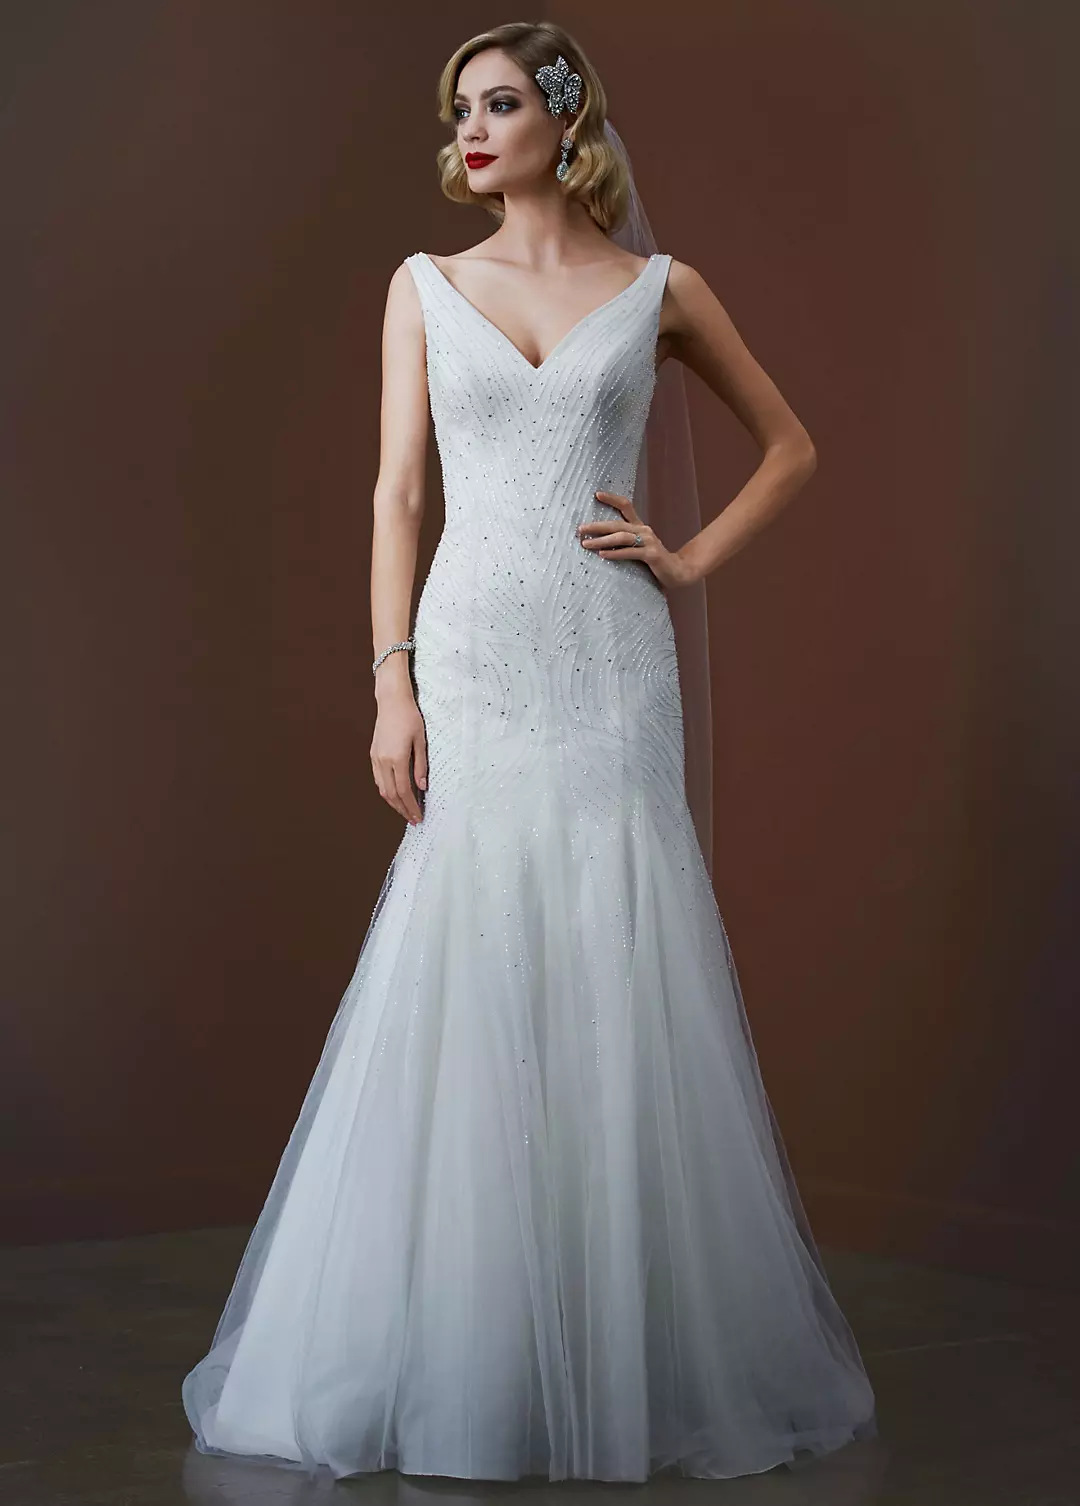 Tulle Tank Gown with Deep V Neckline Image